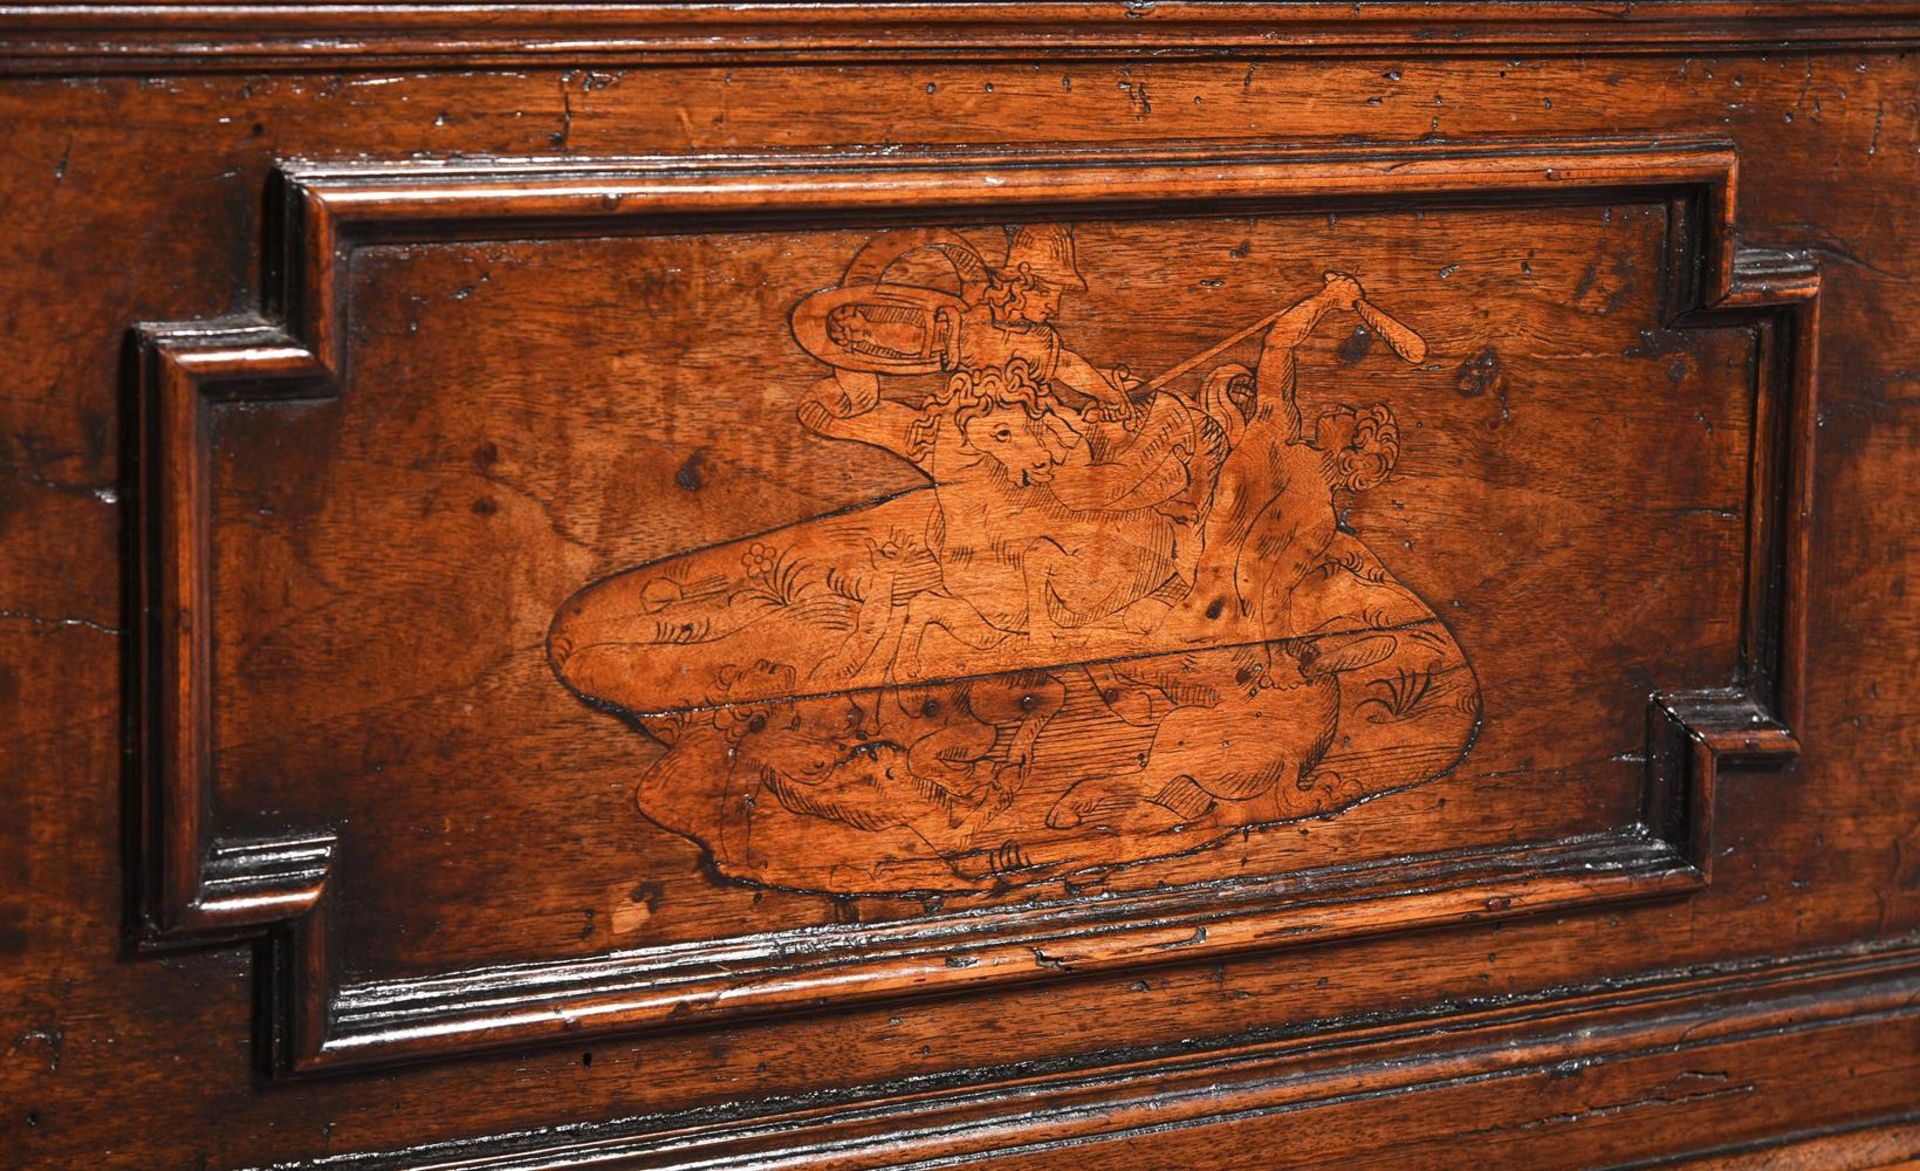 AN ITALIAN CARVED WALNUT AND INLAID CASSONE, EARLY 17TH CENTURY AND LATER ELEMENTS - Image 8 of 8